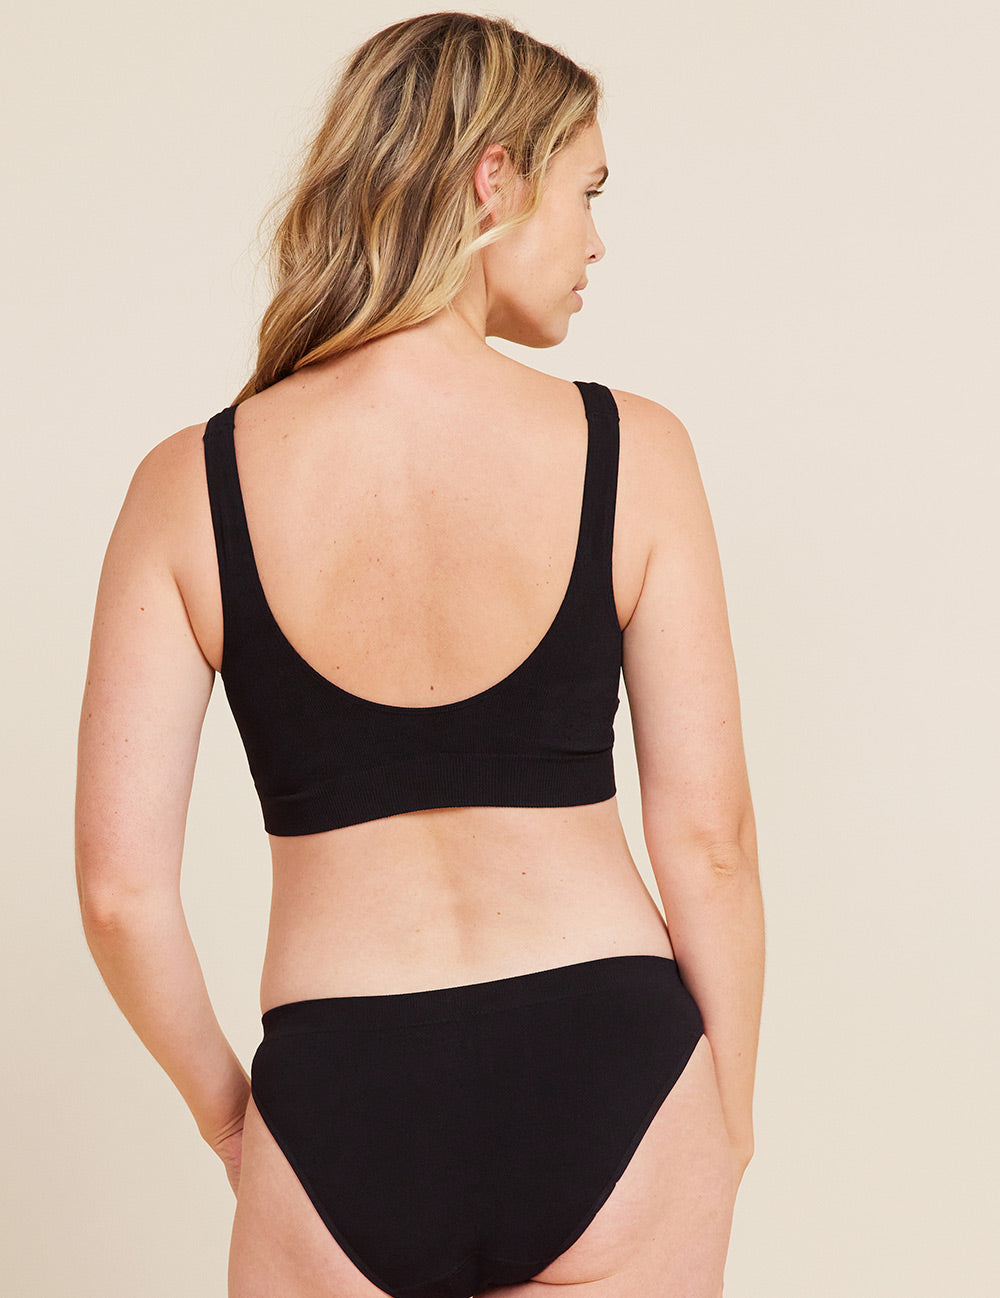 Boody 3-Pack Shaper Crop Bra by Boody Online, THE ICONIC